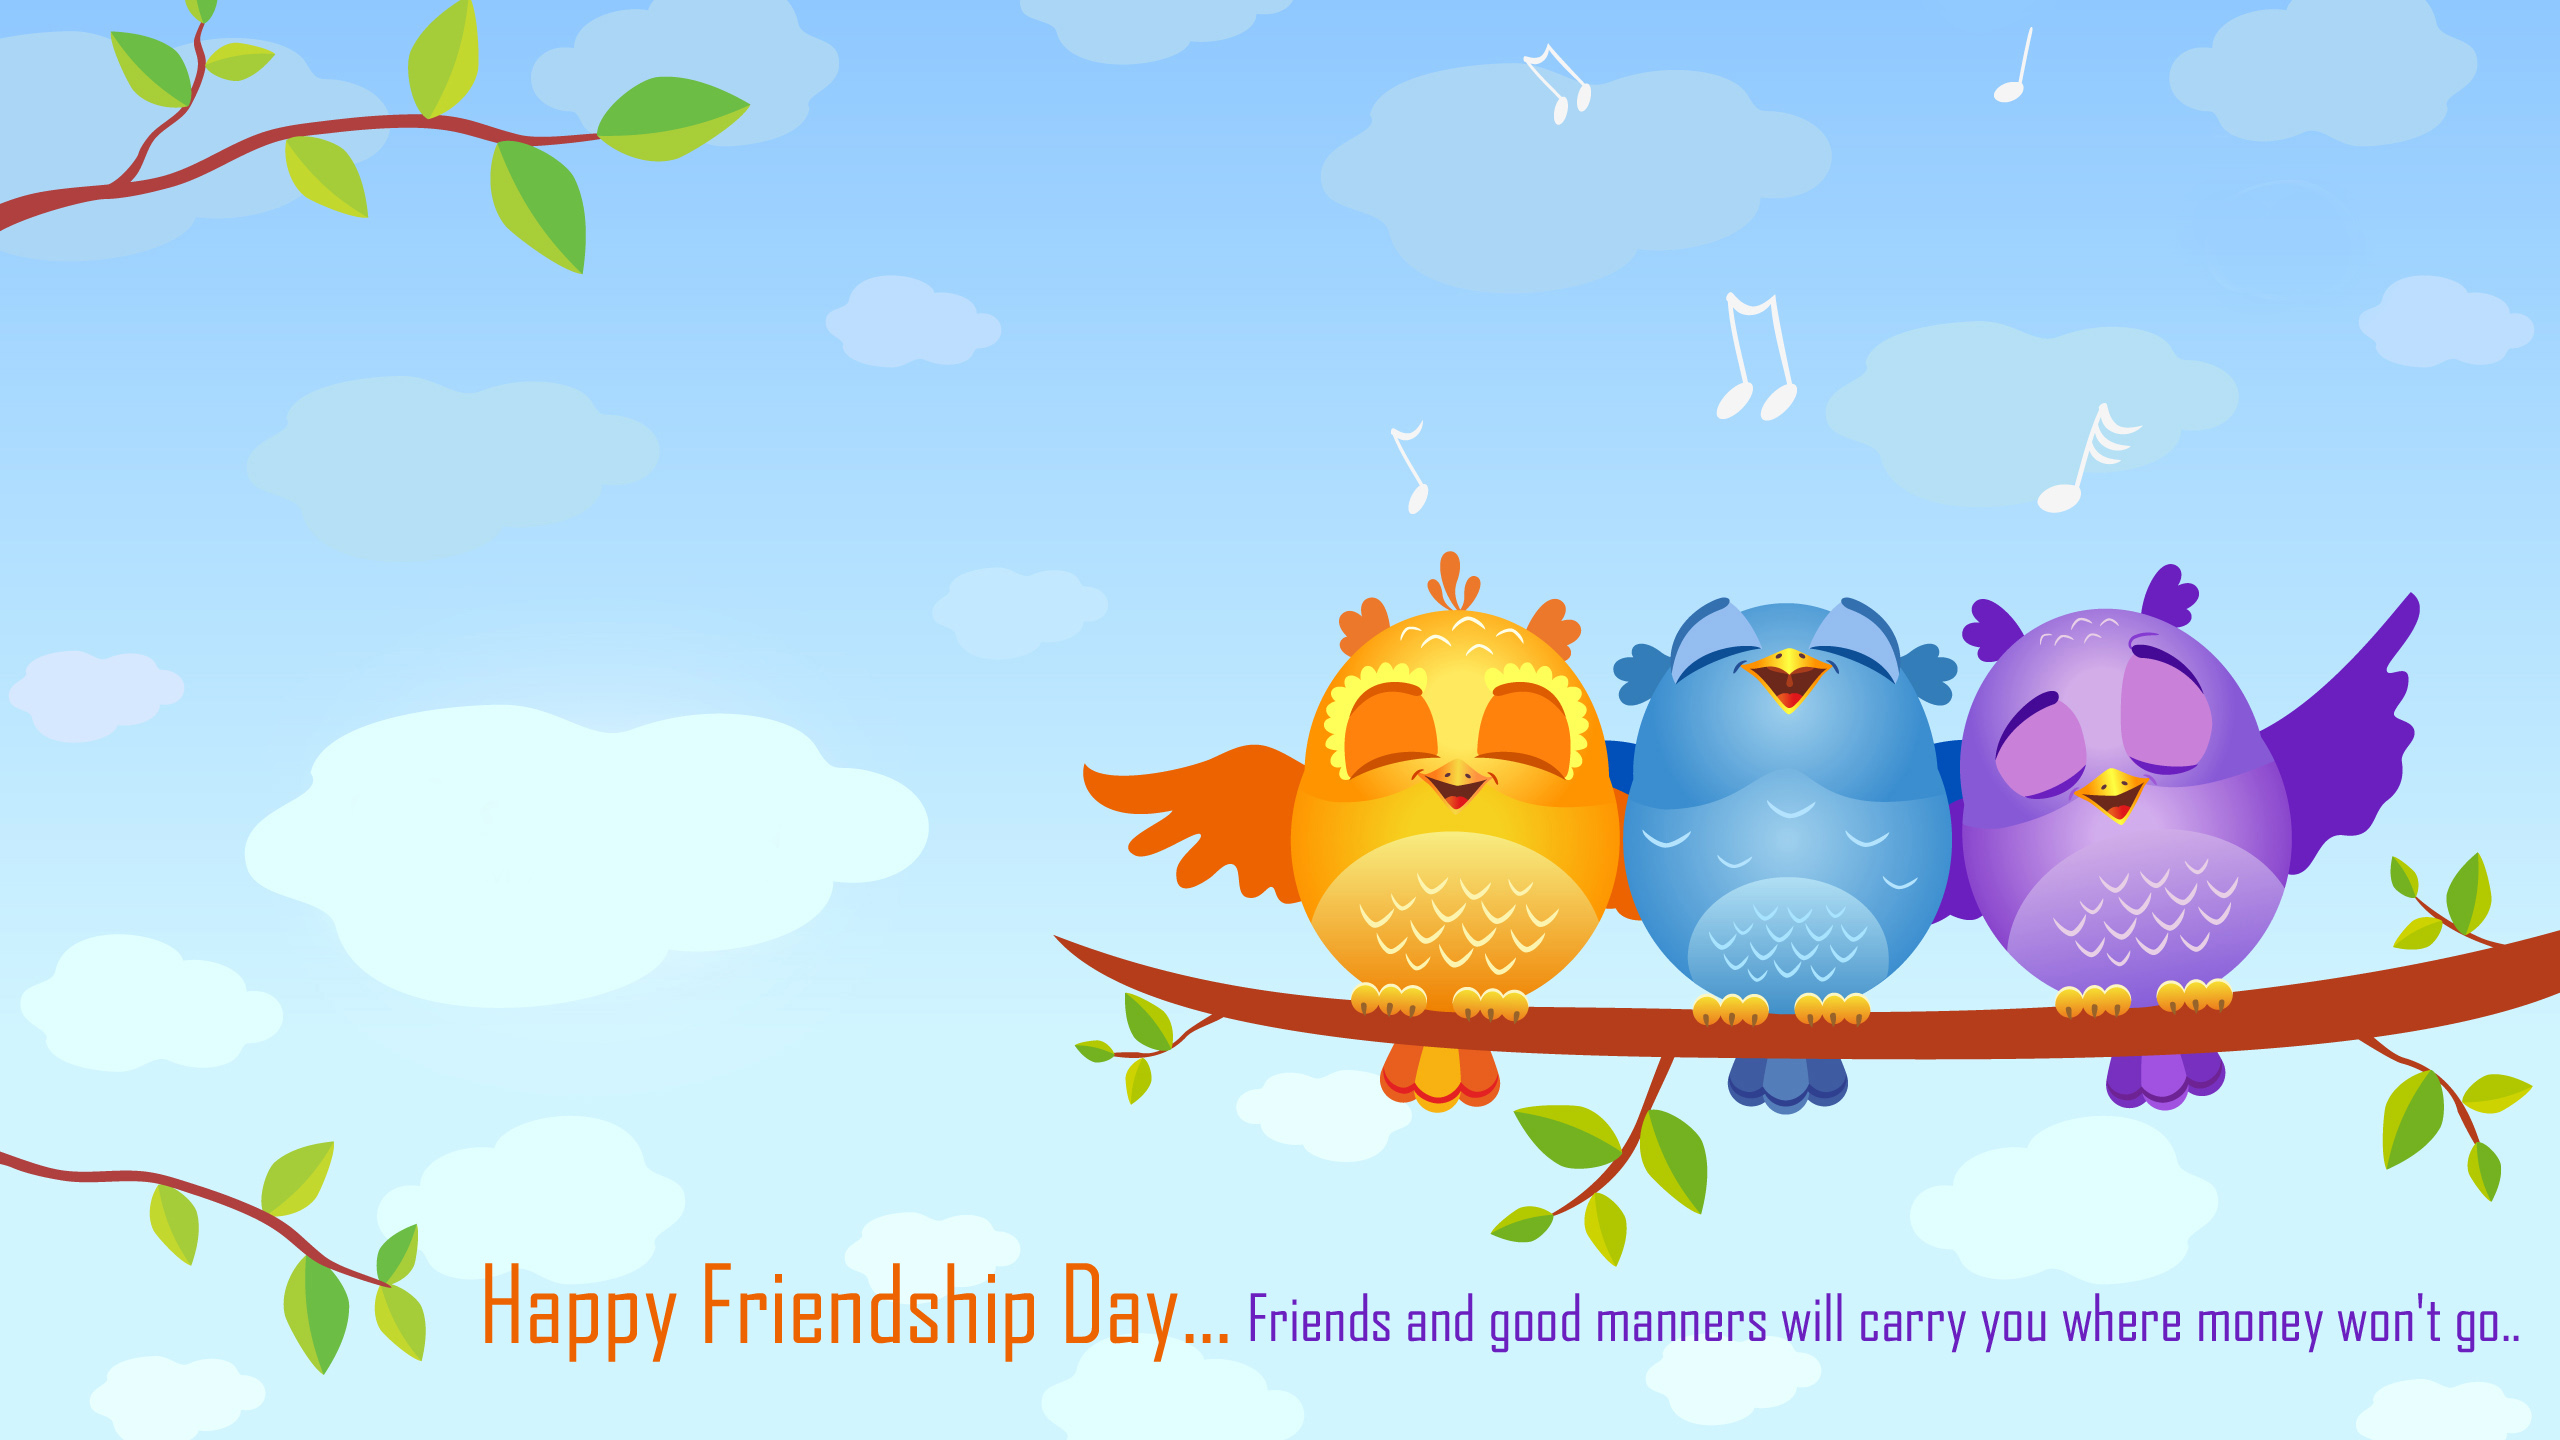 Happy Friendship day: Friendship Day Images Pictures Wallpapers